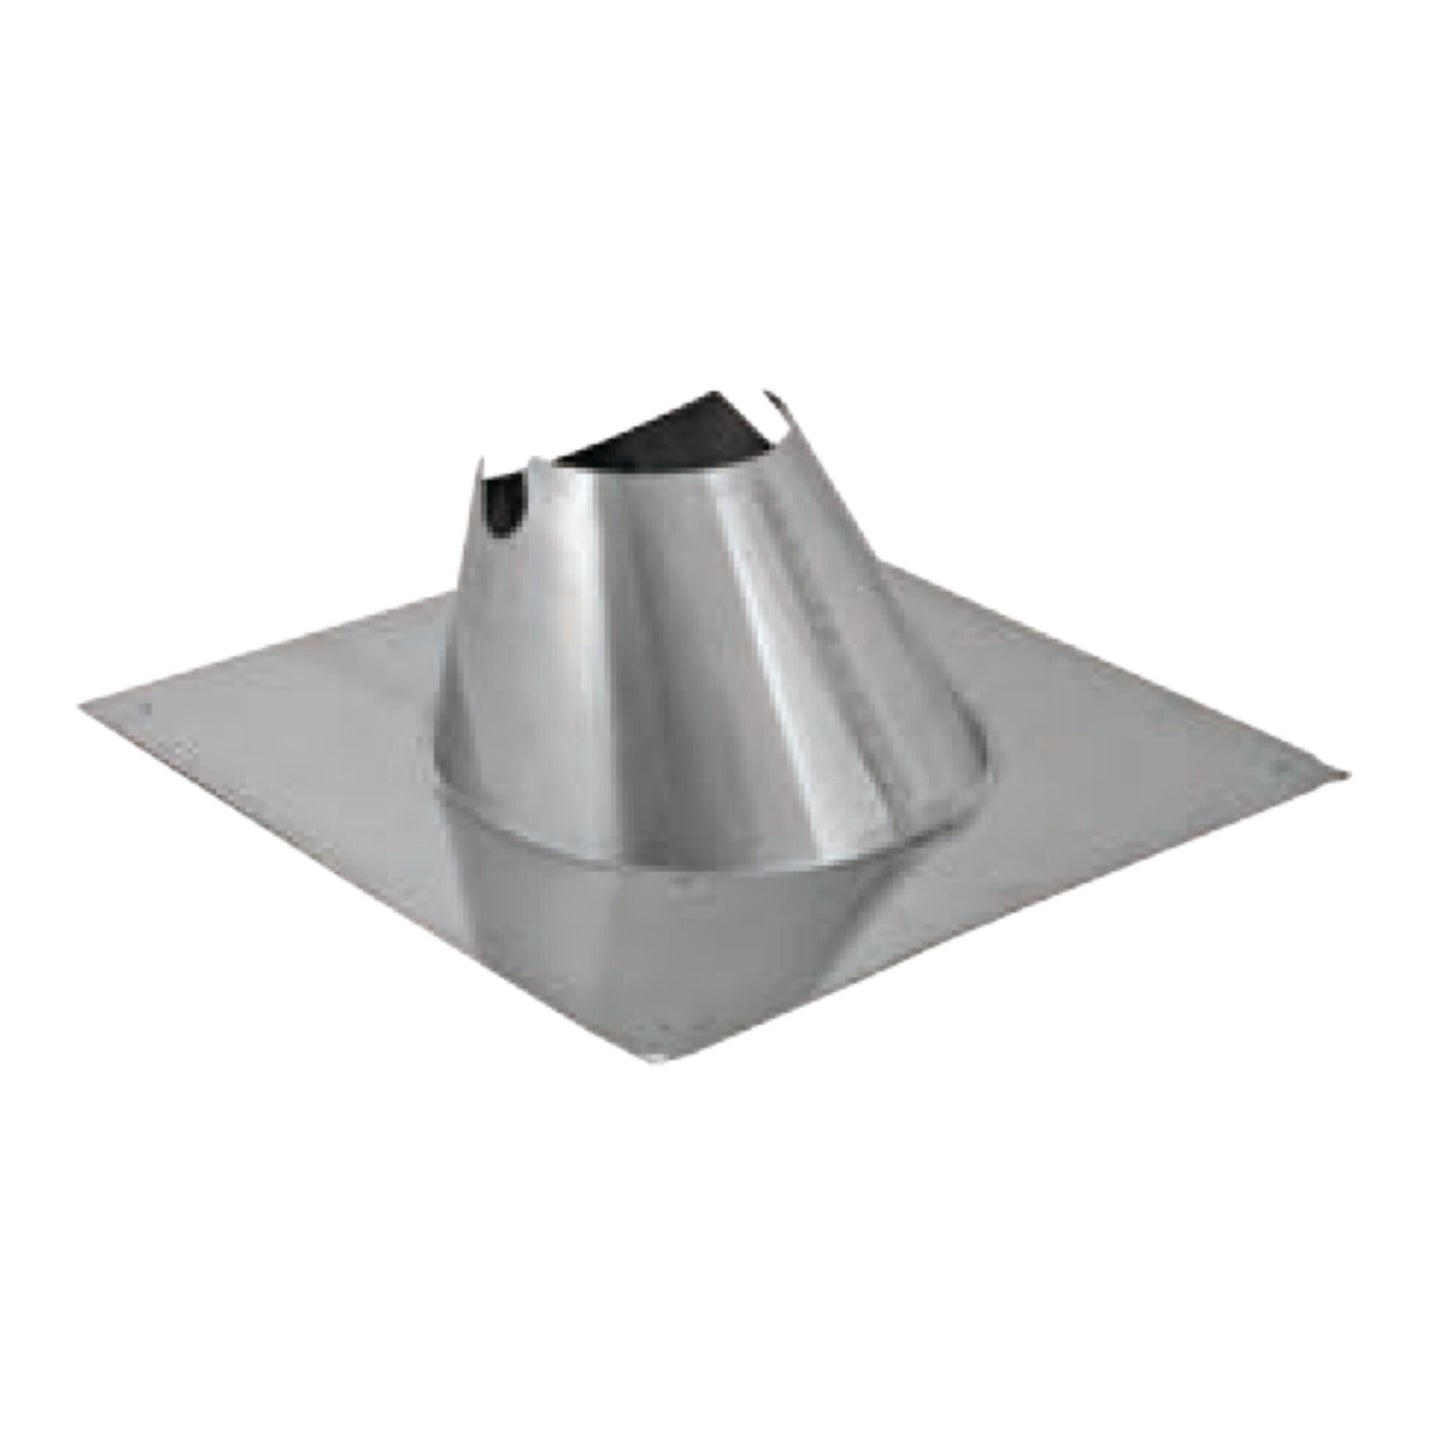 DuraVent FasNSeal 5" 29-4C Stainless Steel Variable Pitch Roof Flashing